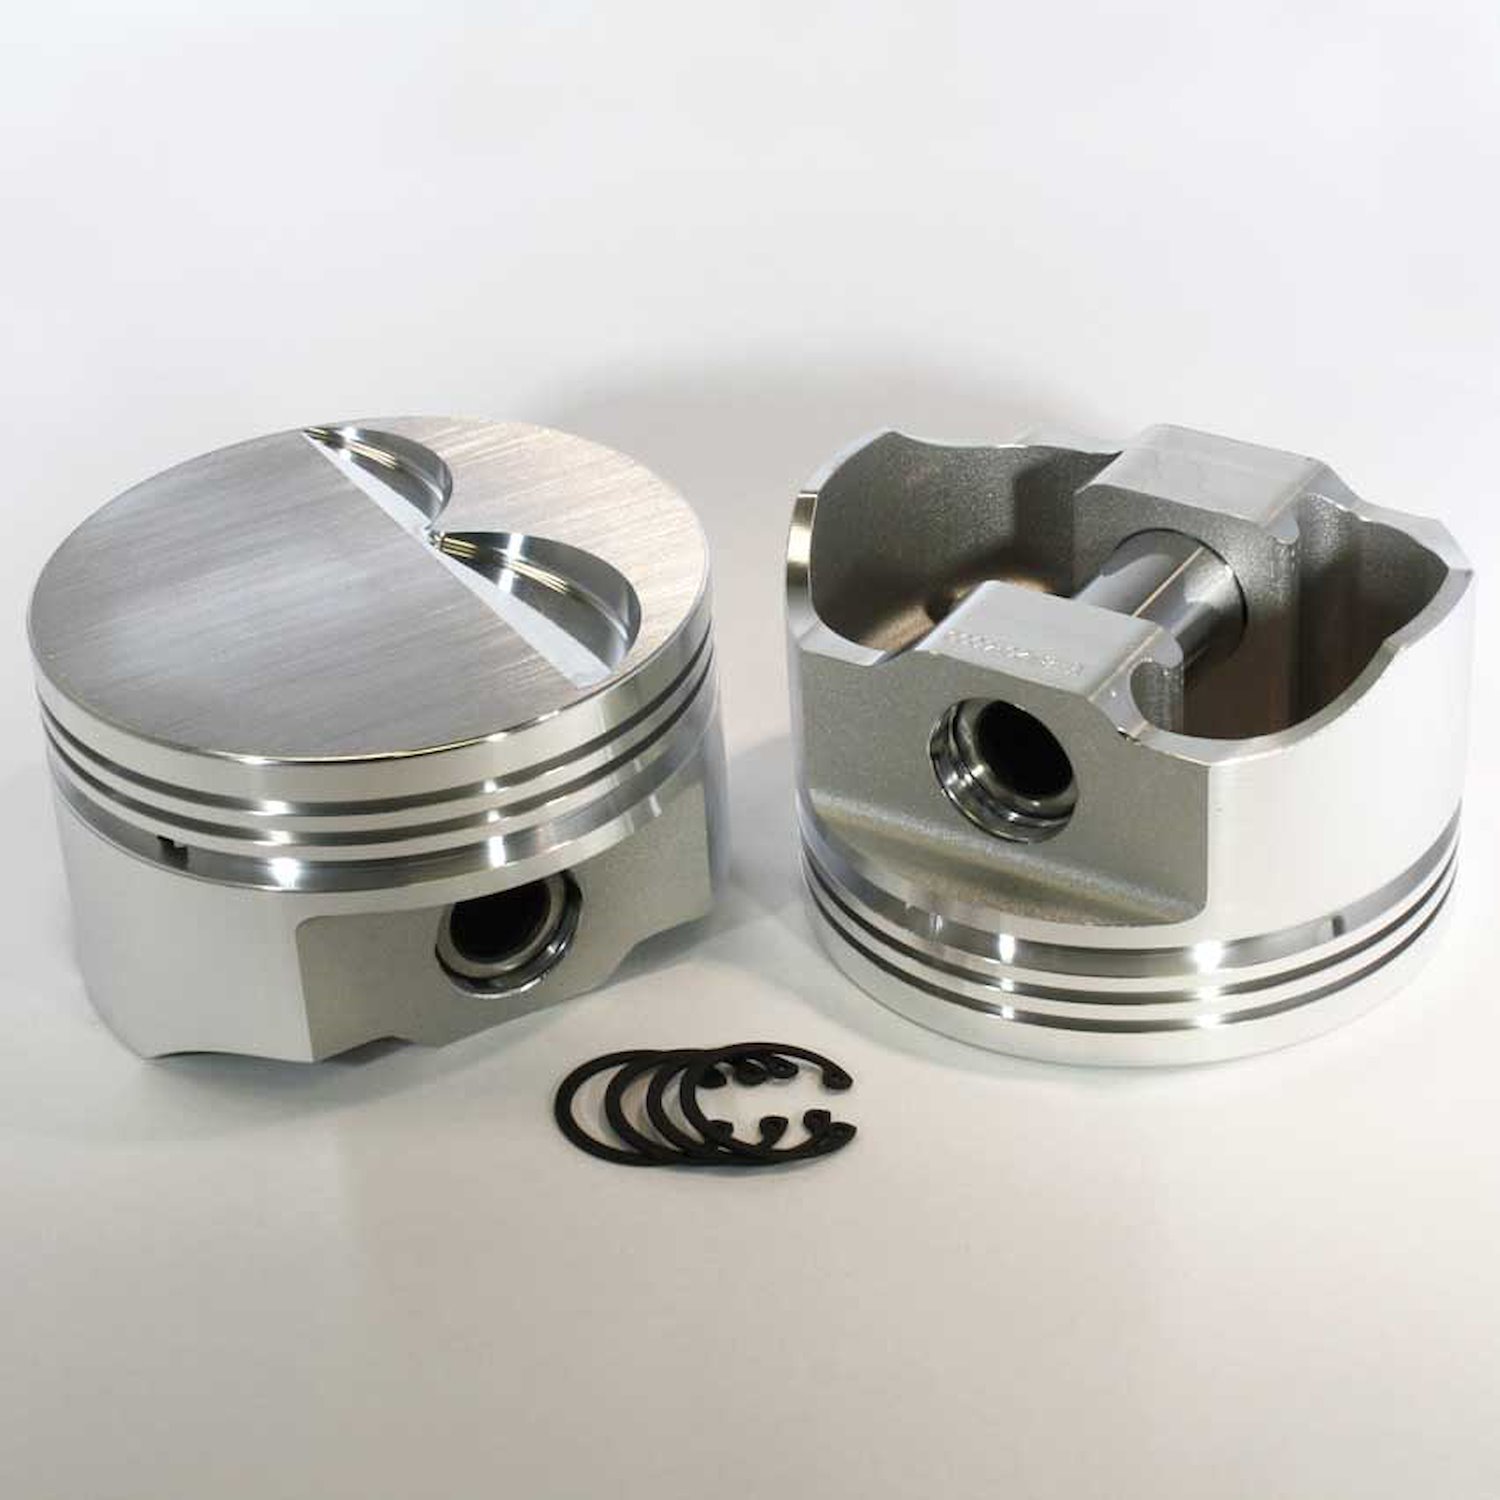 8770-3780 E-Series Flat Top Piston Set for 1997-2005 Chevy LS, 3.780 in. Bore, -3cc Volume [OEM Stroke]